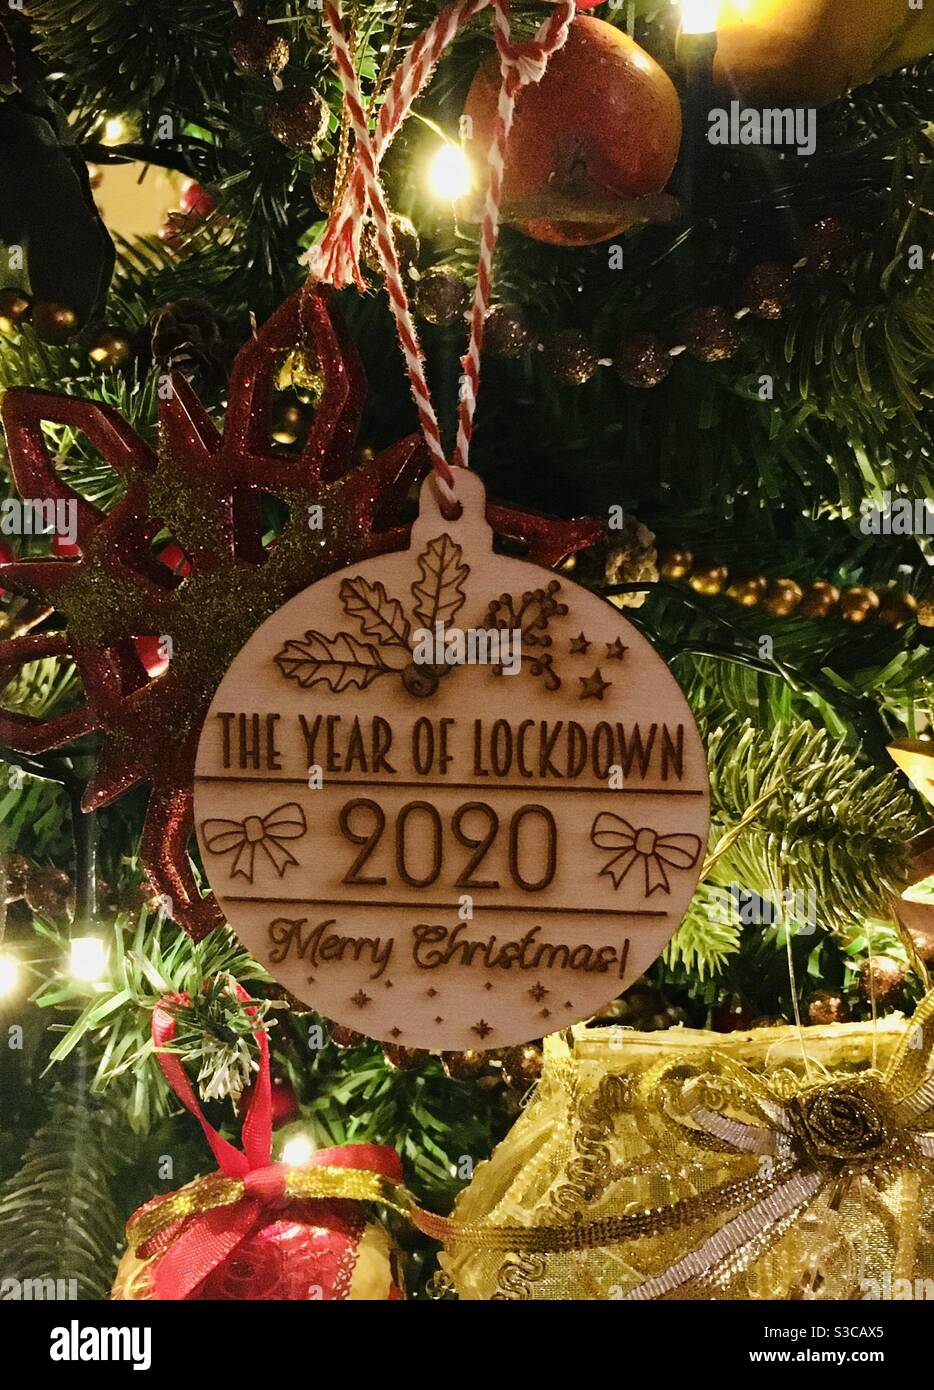 Christmas tree decorations including one for 2020 - the year of lockdown Stock Photo